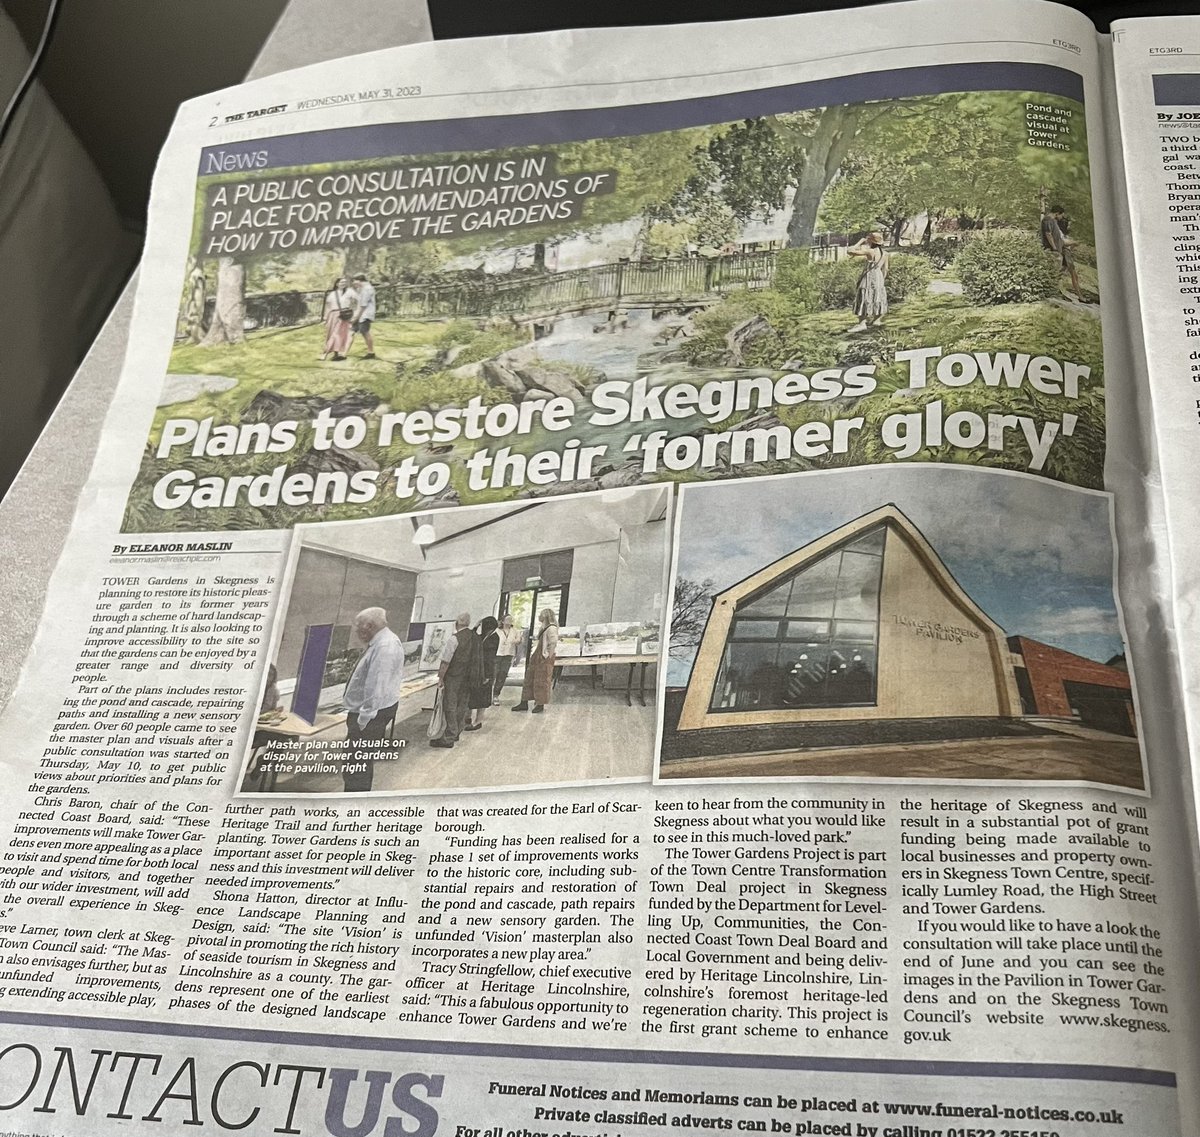 Fabulous feature on #towndeal project for #Skegness - part of the town deal transformation will see investment into Tower Gardens and includes an accessible heritage trail. Thanks to @HeritageLincs @ConnectedCoastL @luhc @SkegnessCouncil @EastLindseyDC #LincsConnect